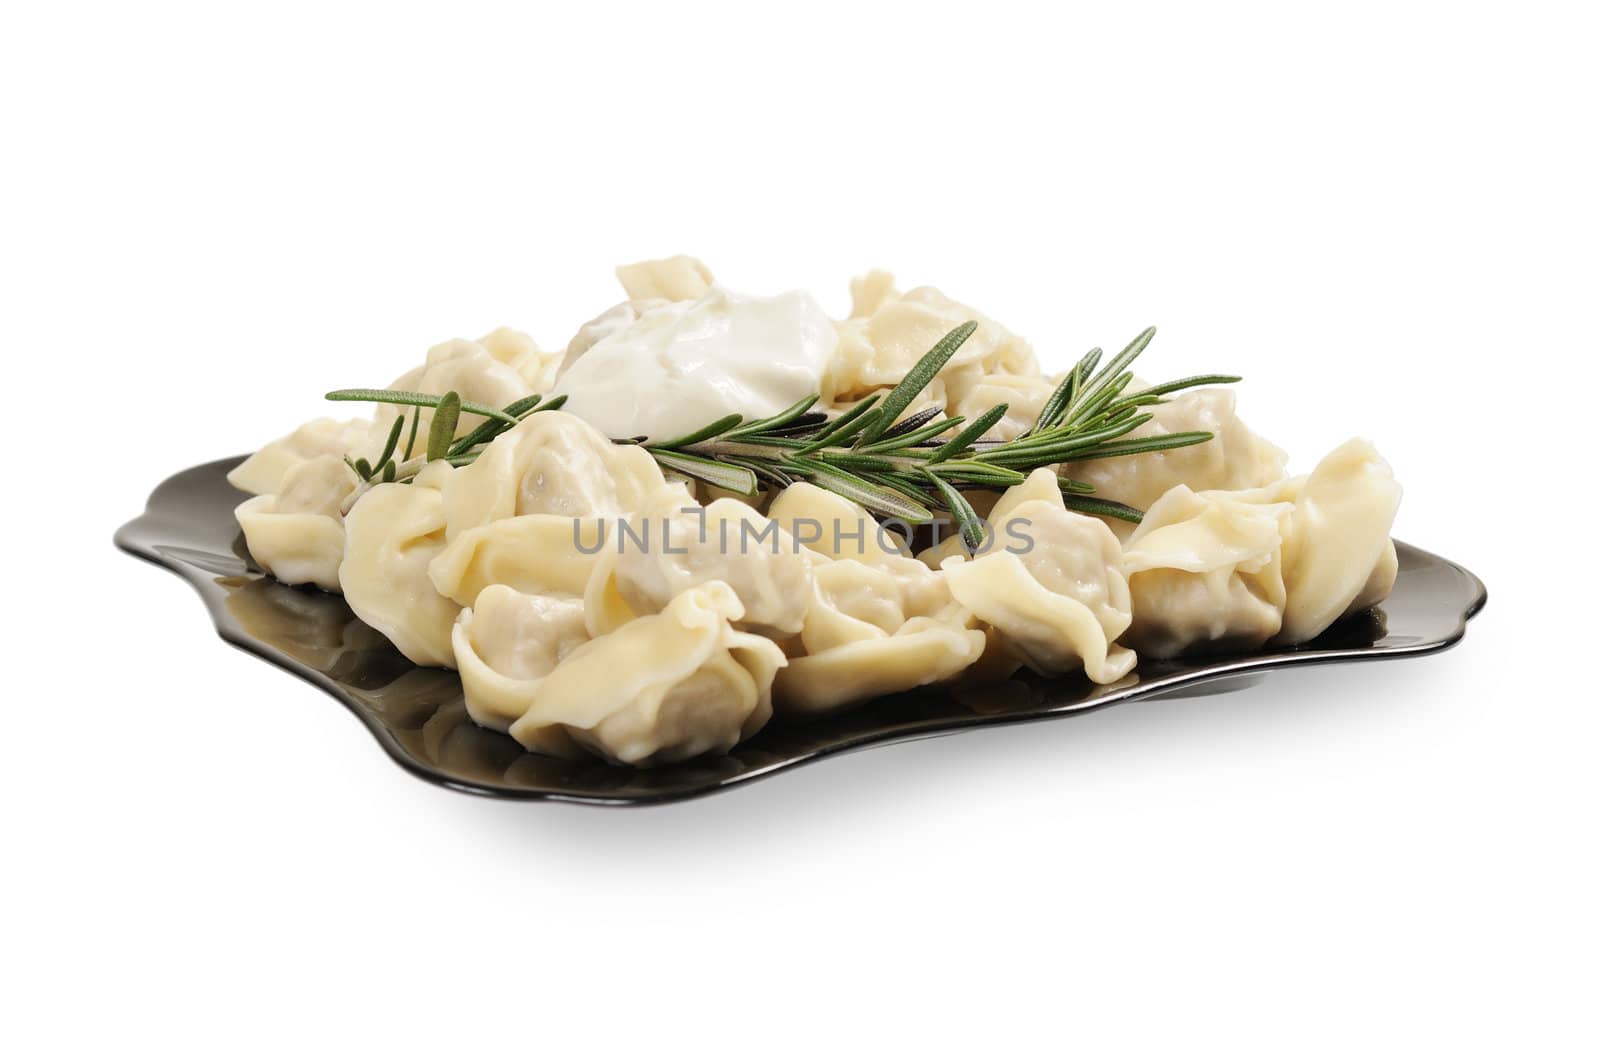 Ready to eat ravioli on a plate. Decorated with rosemary. Isolated on white.